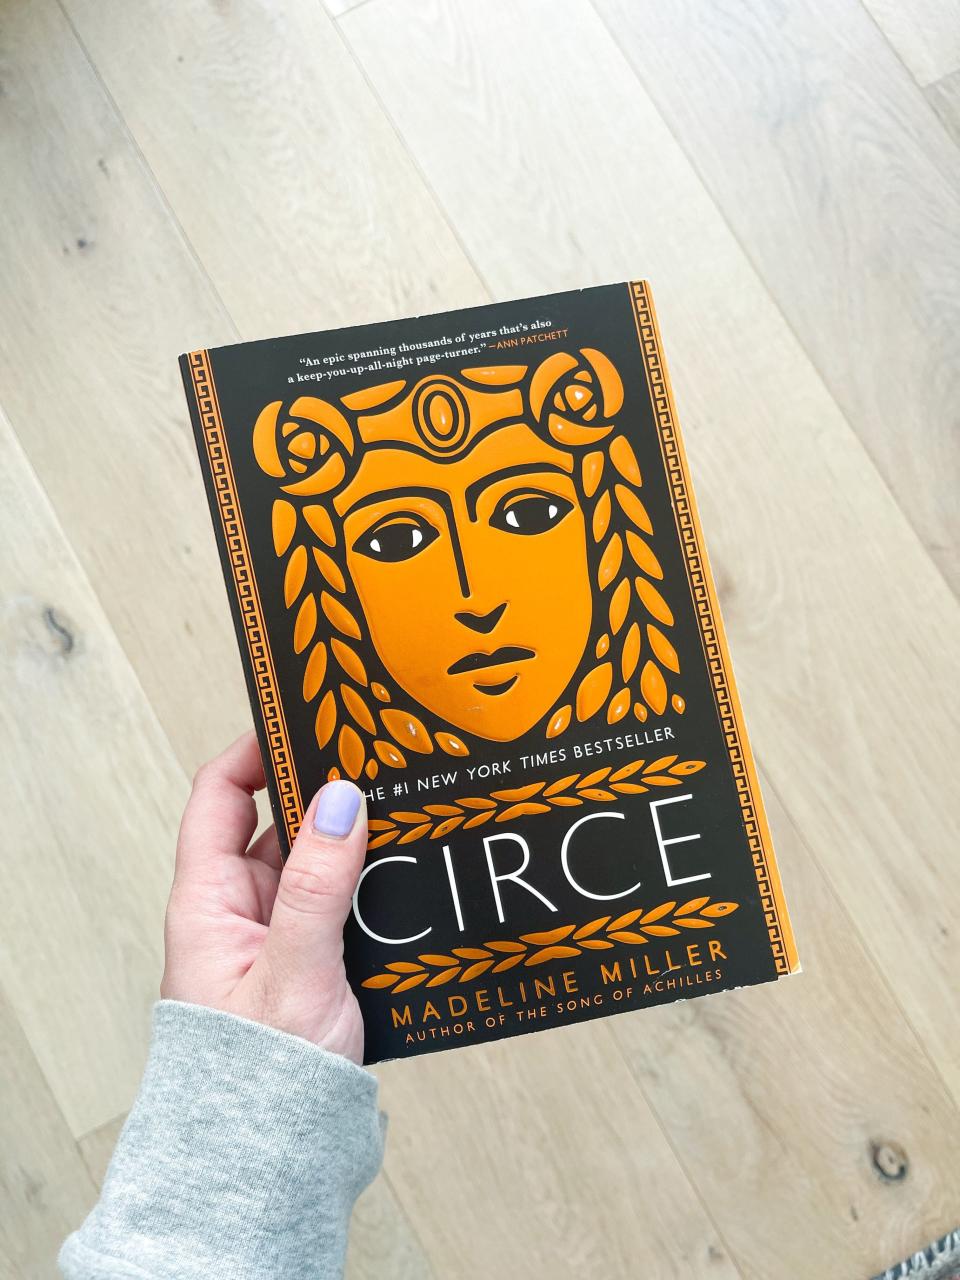 "Circe" by Madeline Miller will be the featured book in this year's NEA Big Read Lakeshore from Hope College.